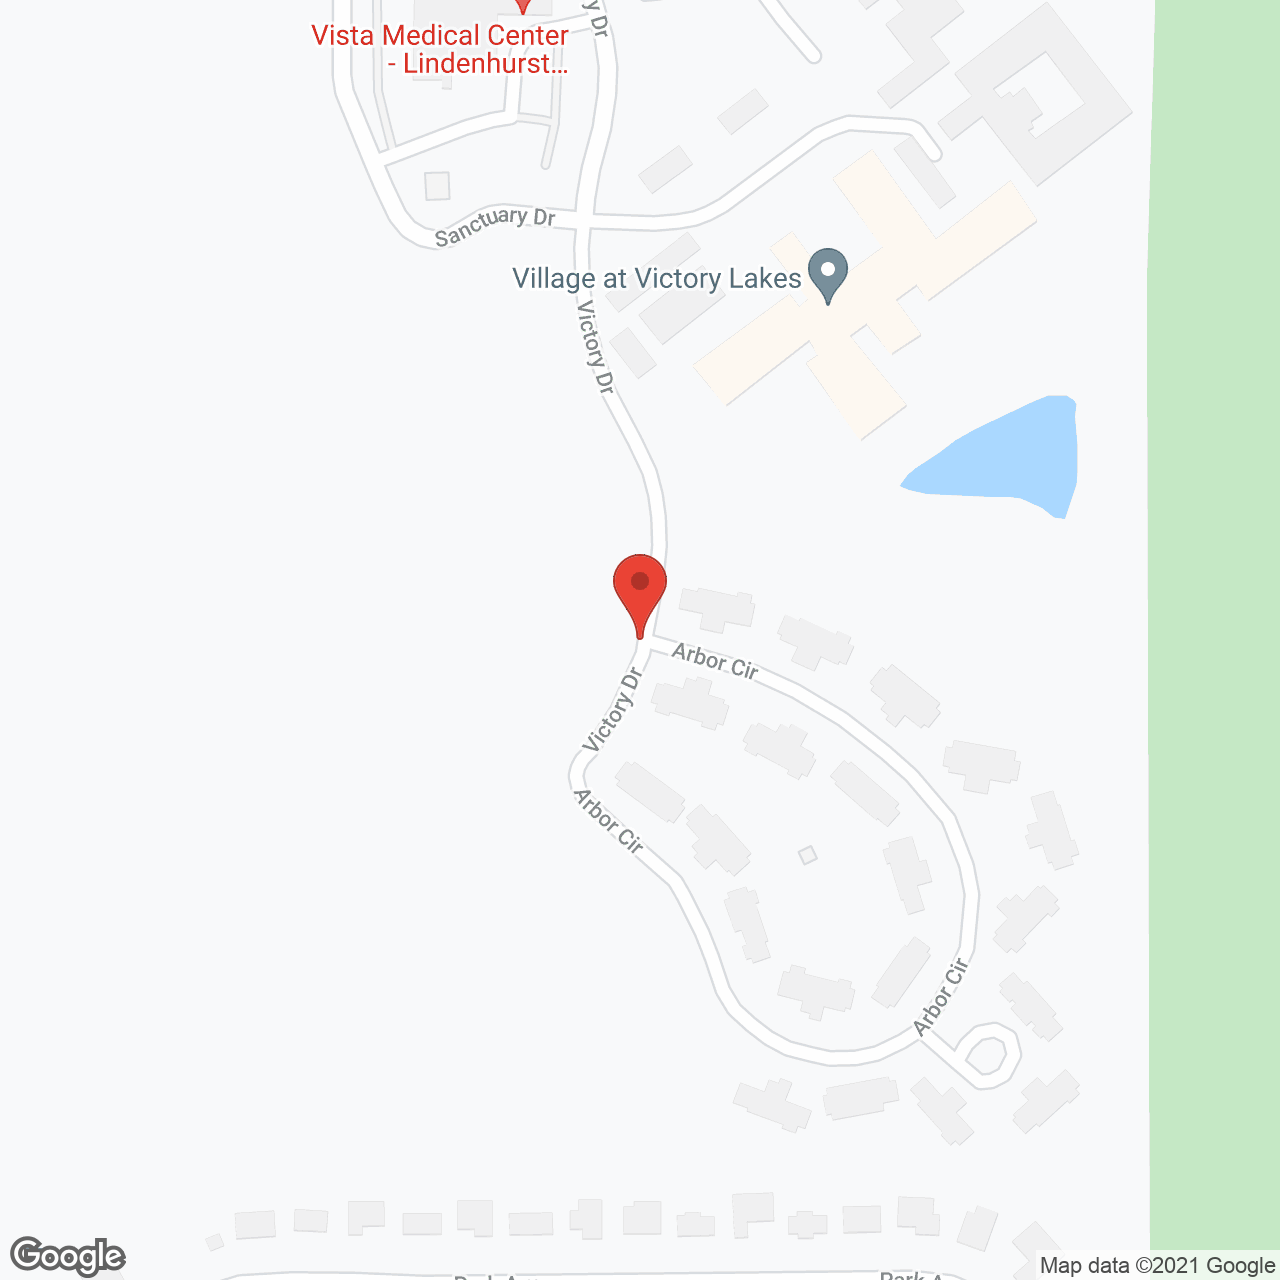 The Village at Victory Lakes in google map